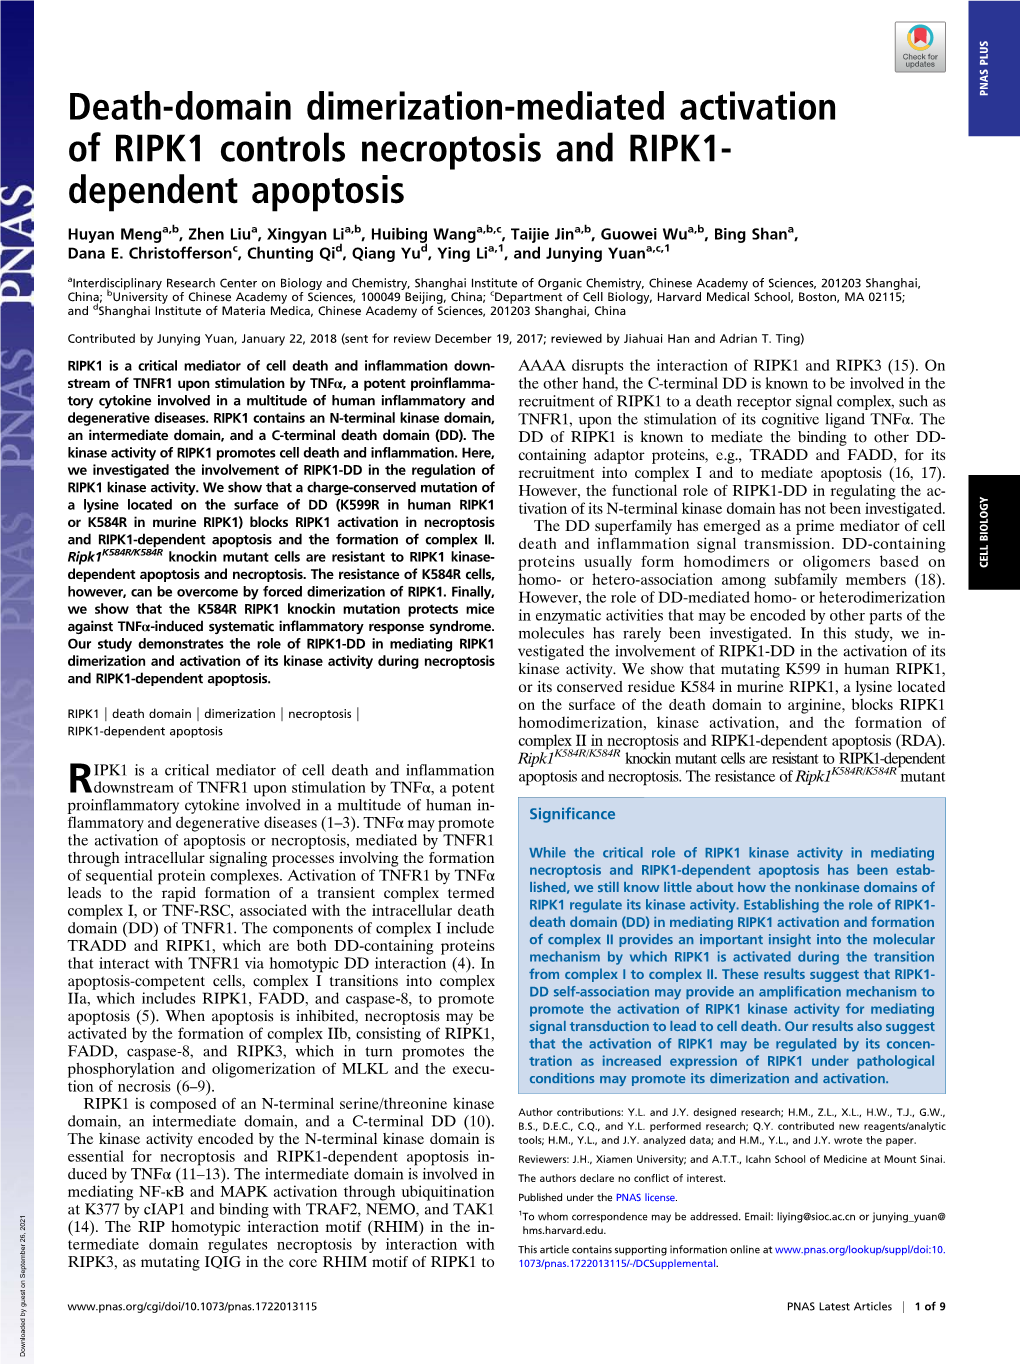 Death-Domain Dimerization-Mediated Activation of RIPK1 Controls Necroptosis and RIPK1-Dependent Apoptosis